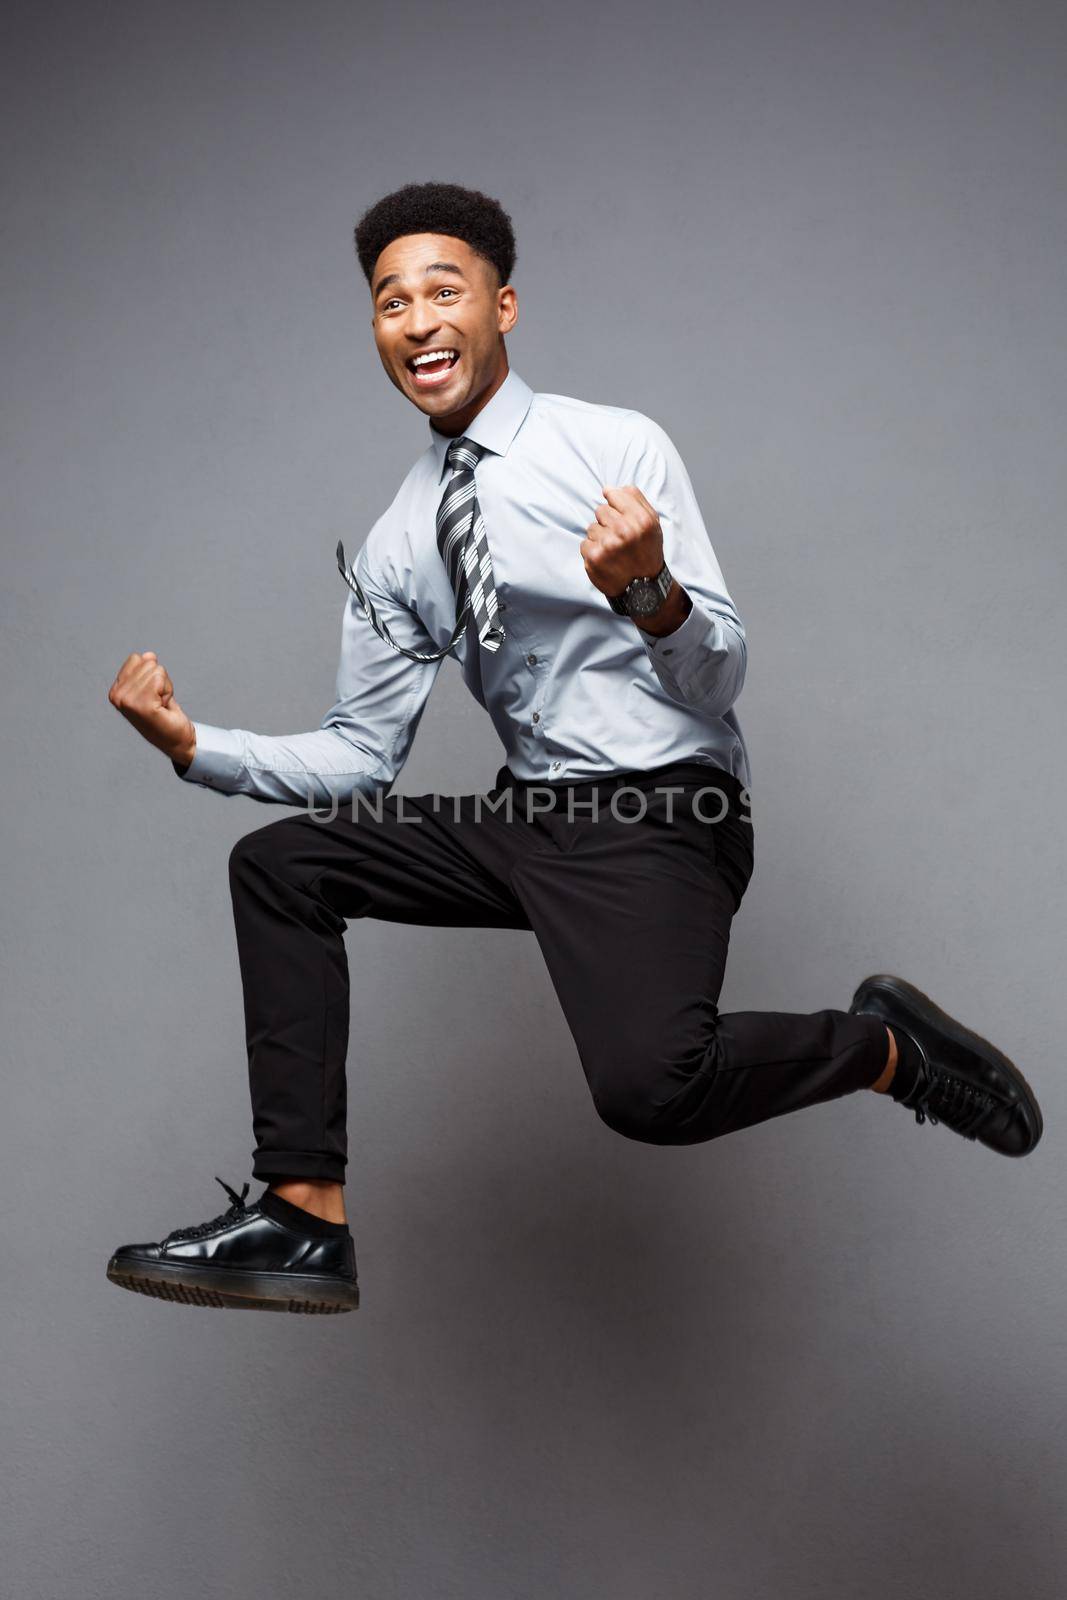 Business Concept - Full length portrait of successful african american businessman happy jumping in the office